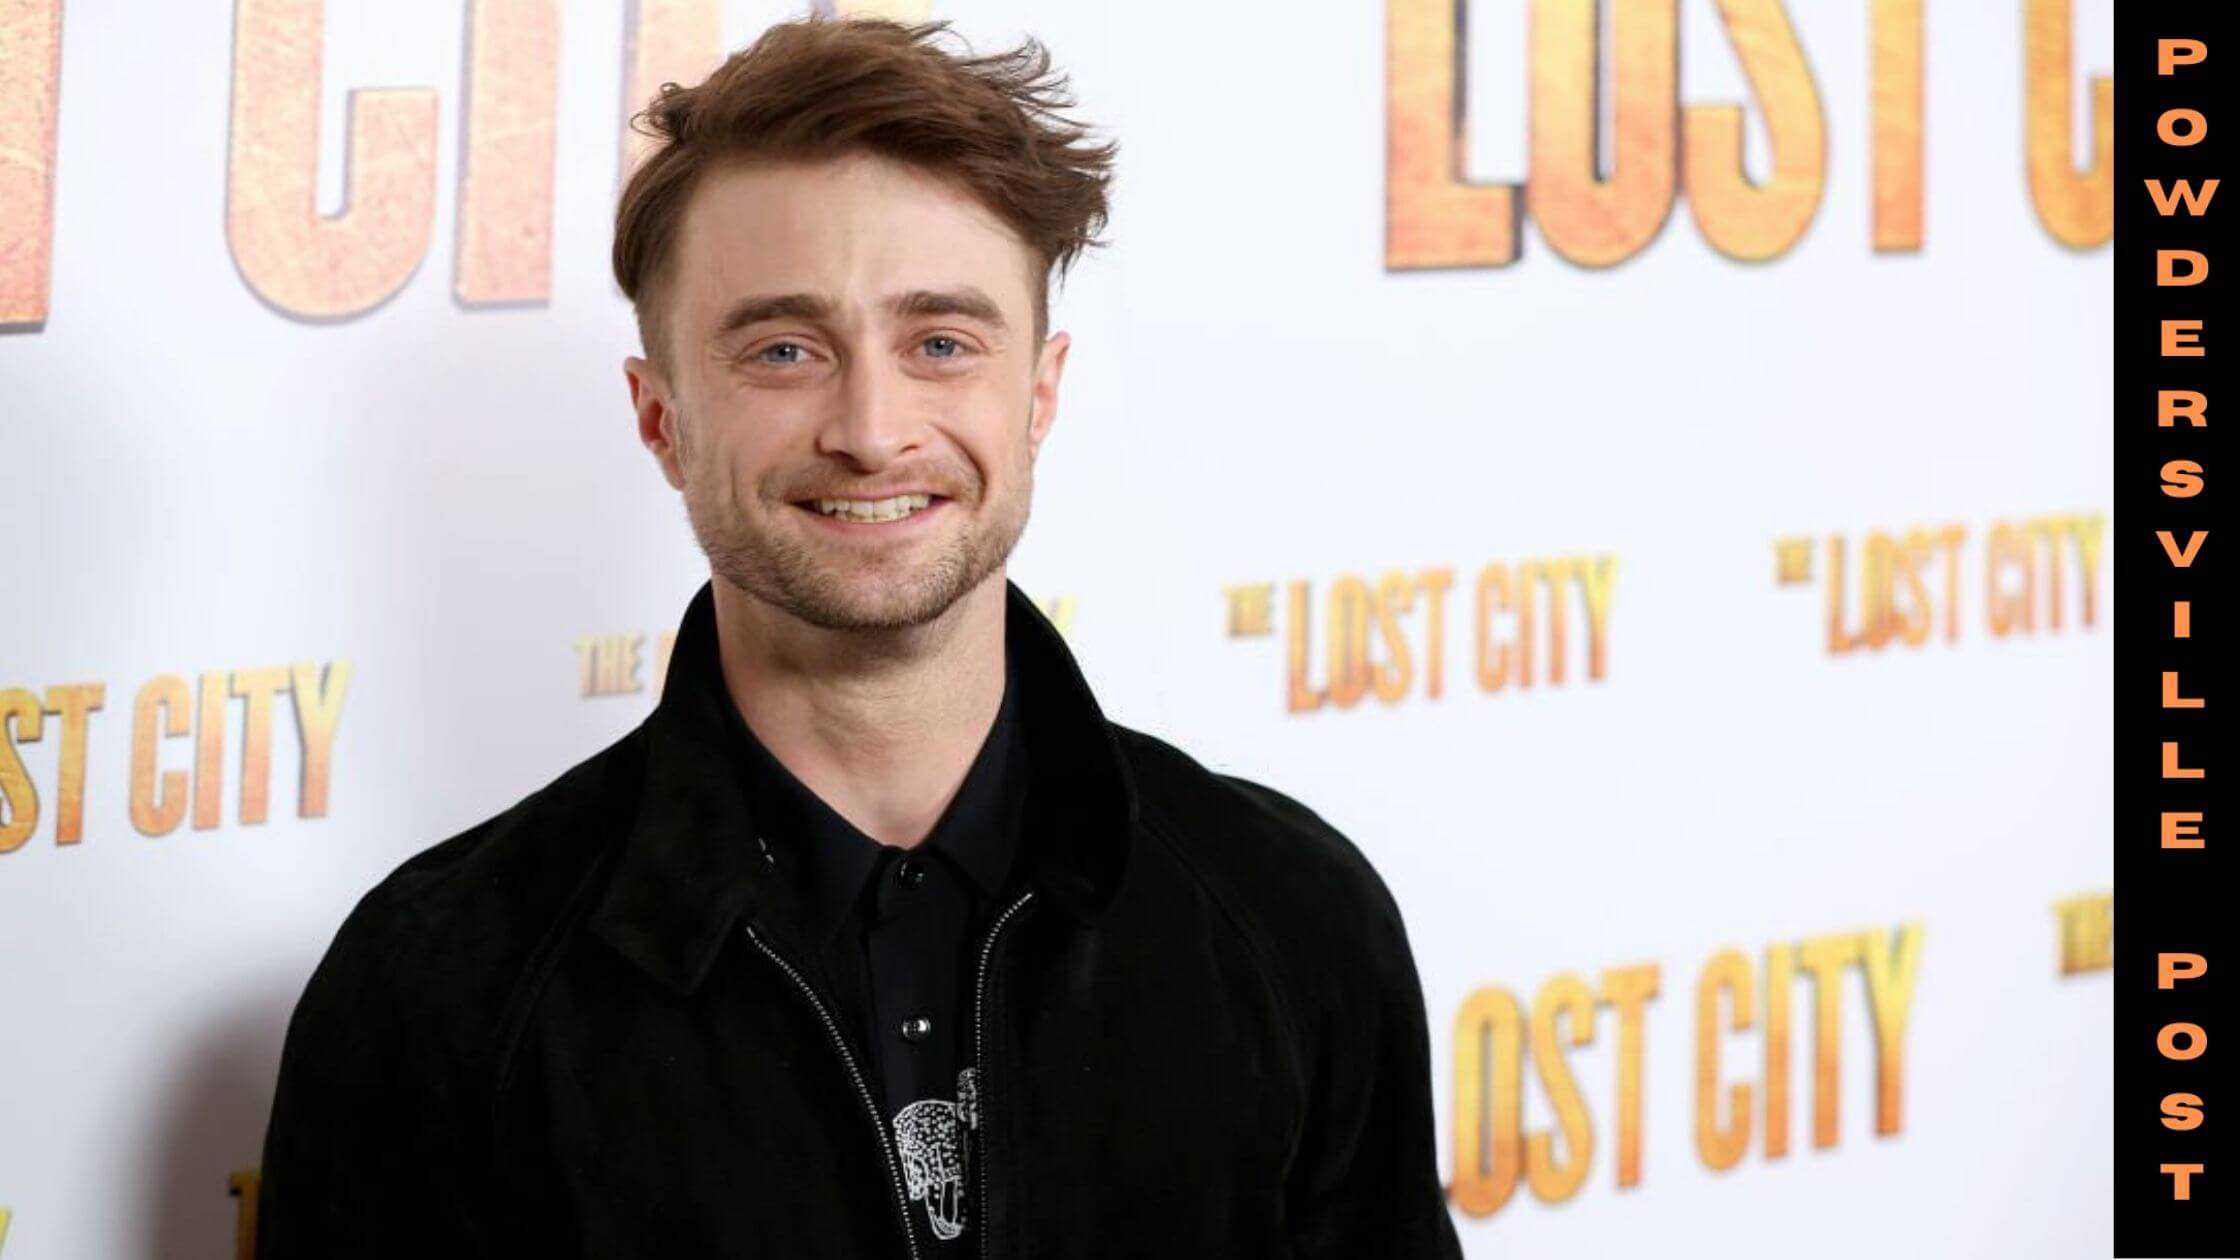 Daniel Radcliffe Is Set To Play The Role Of Wolverine In MCU Studios!! He Responds To MCU Fan Casting Rumors